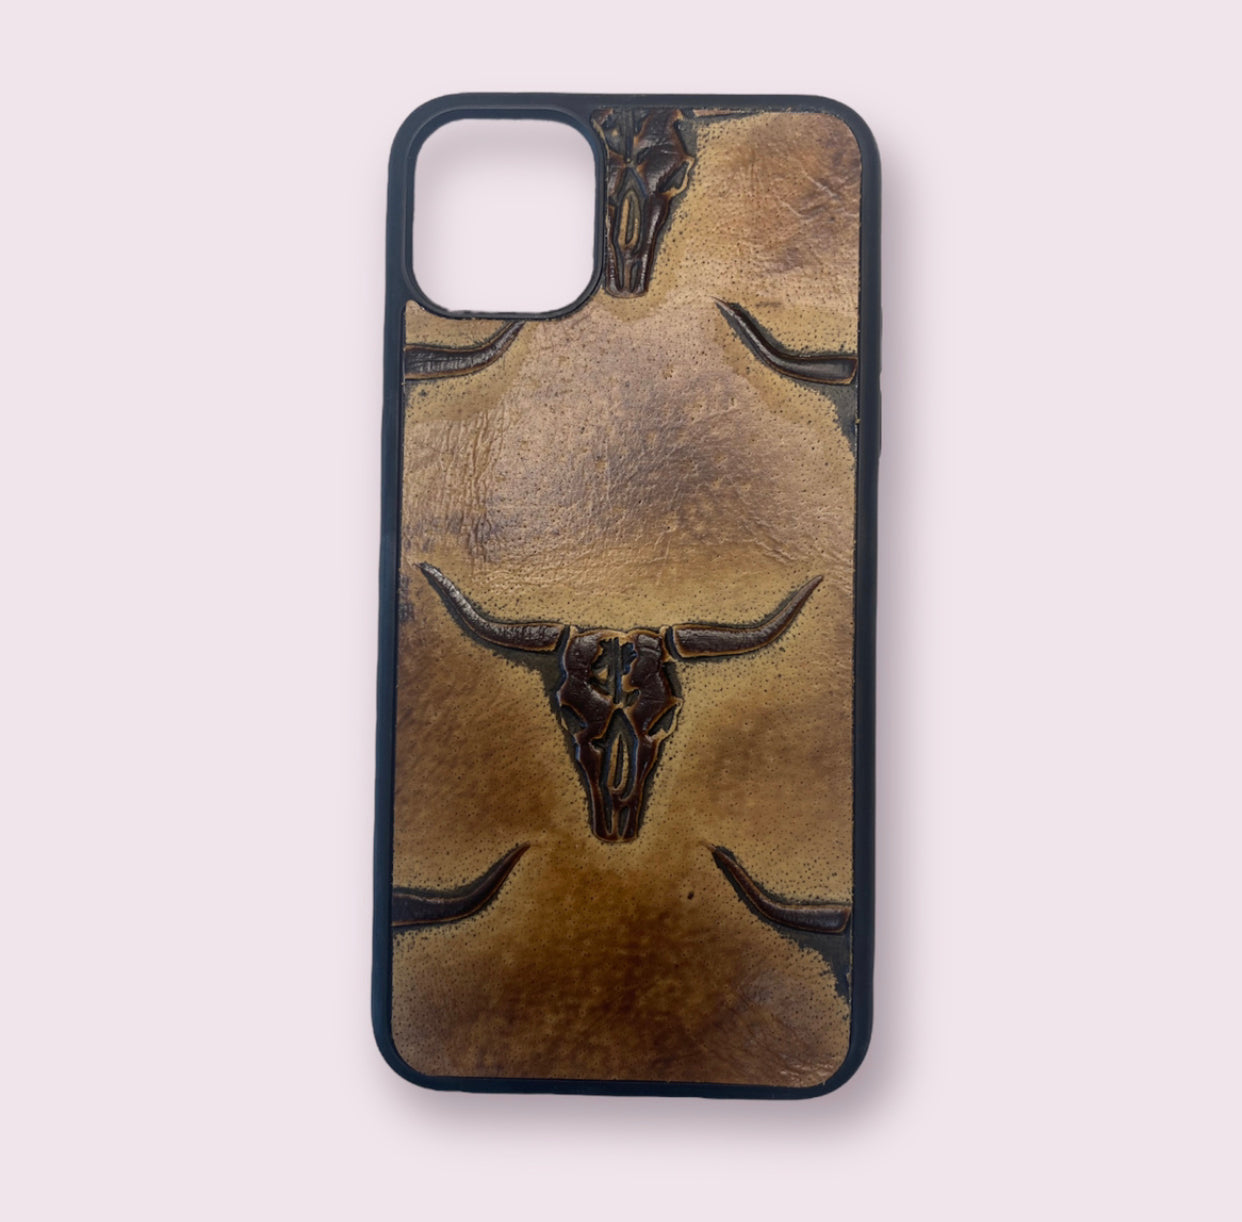 A8355 - IPhone 11 Pro Max Tooled Leather Case